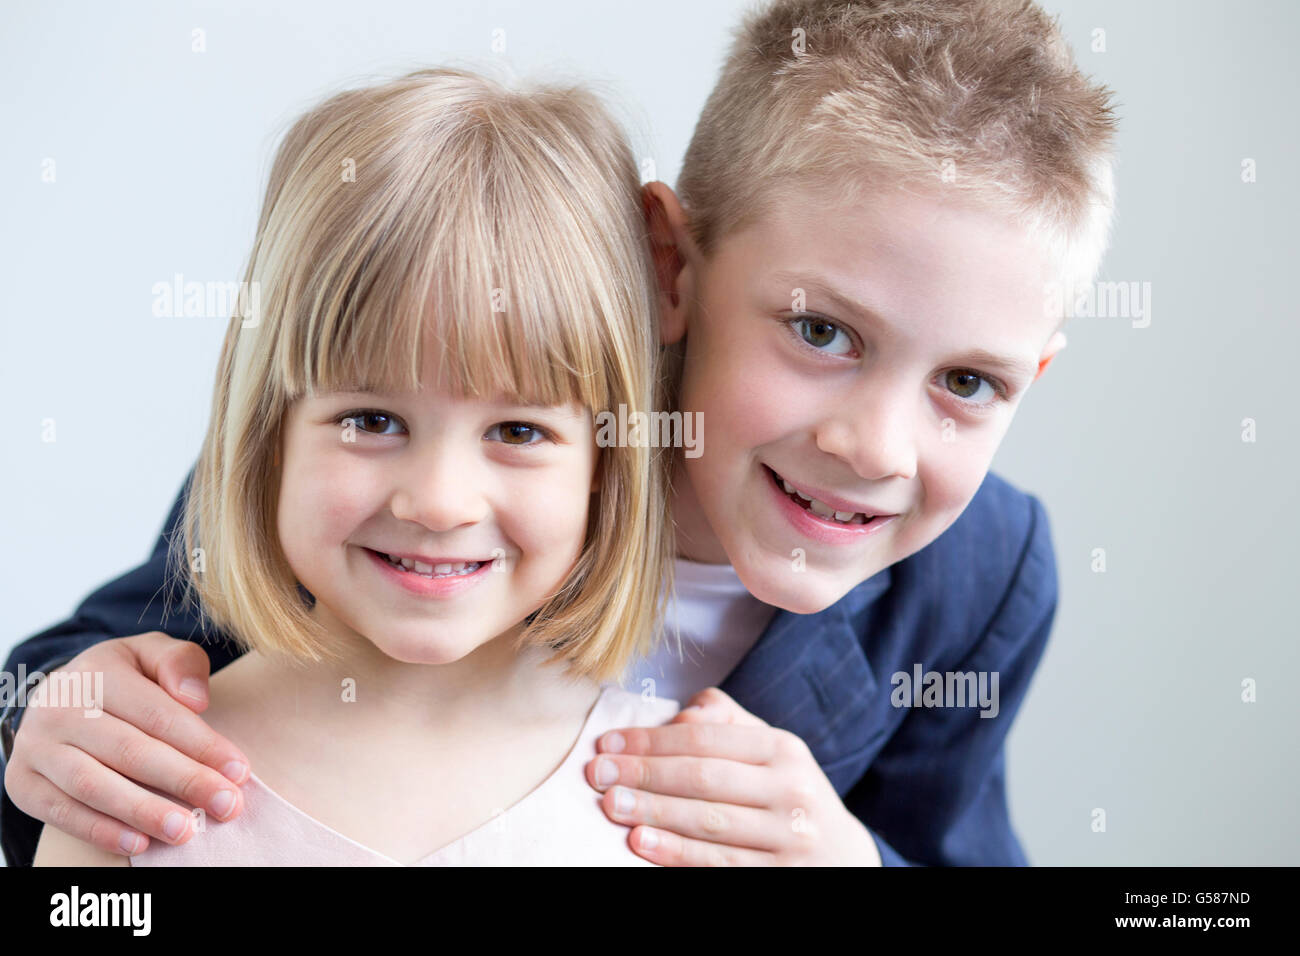 Young boy and girl dressed up formally and posing for the camera together on a white background Stock Photo